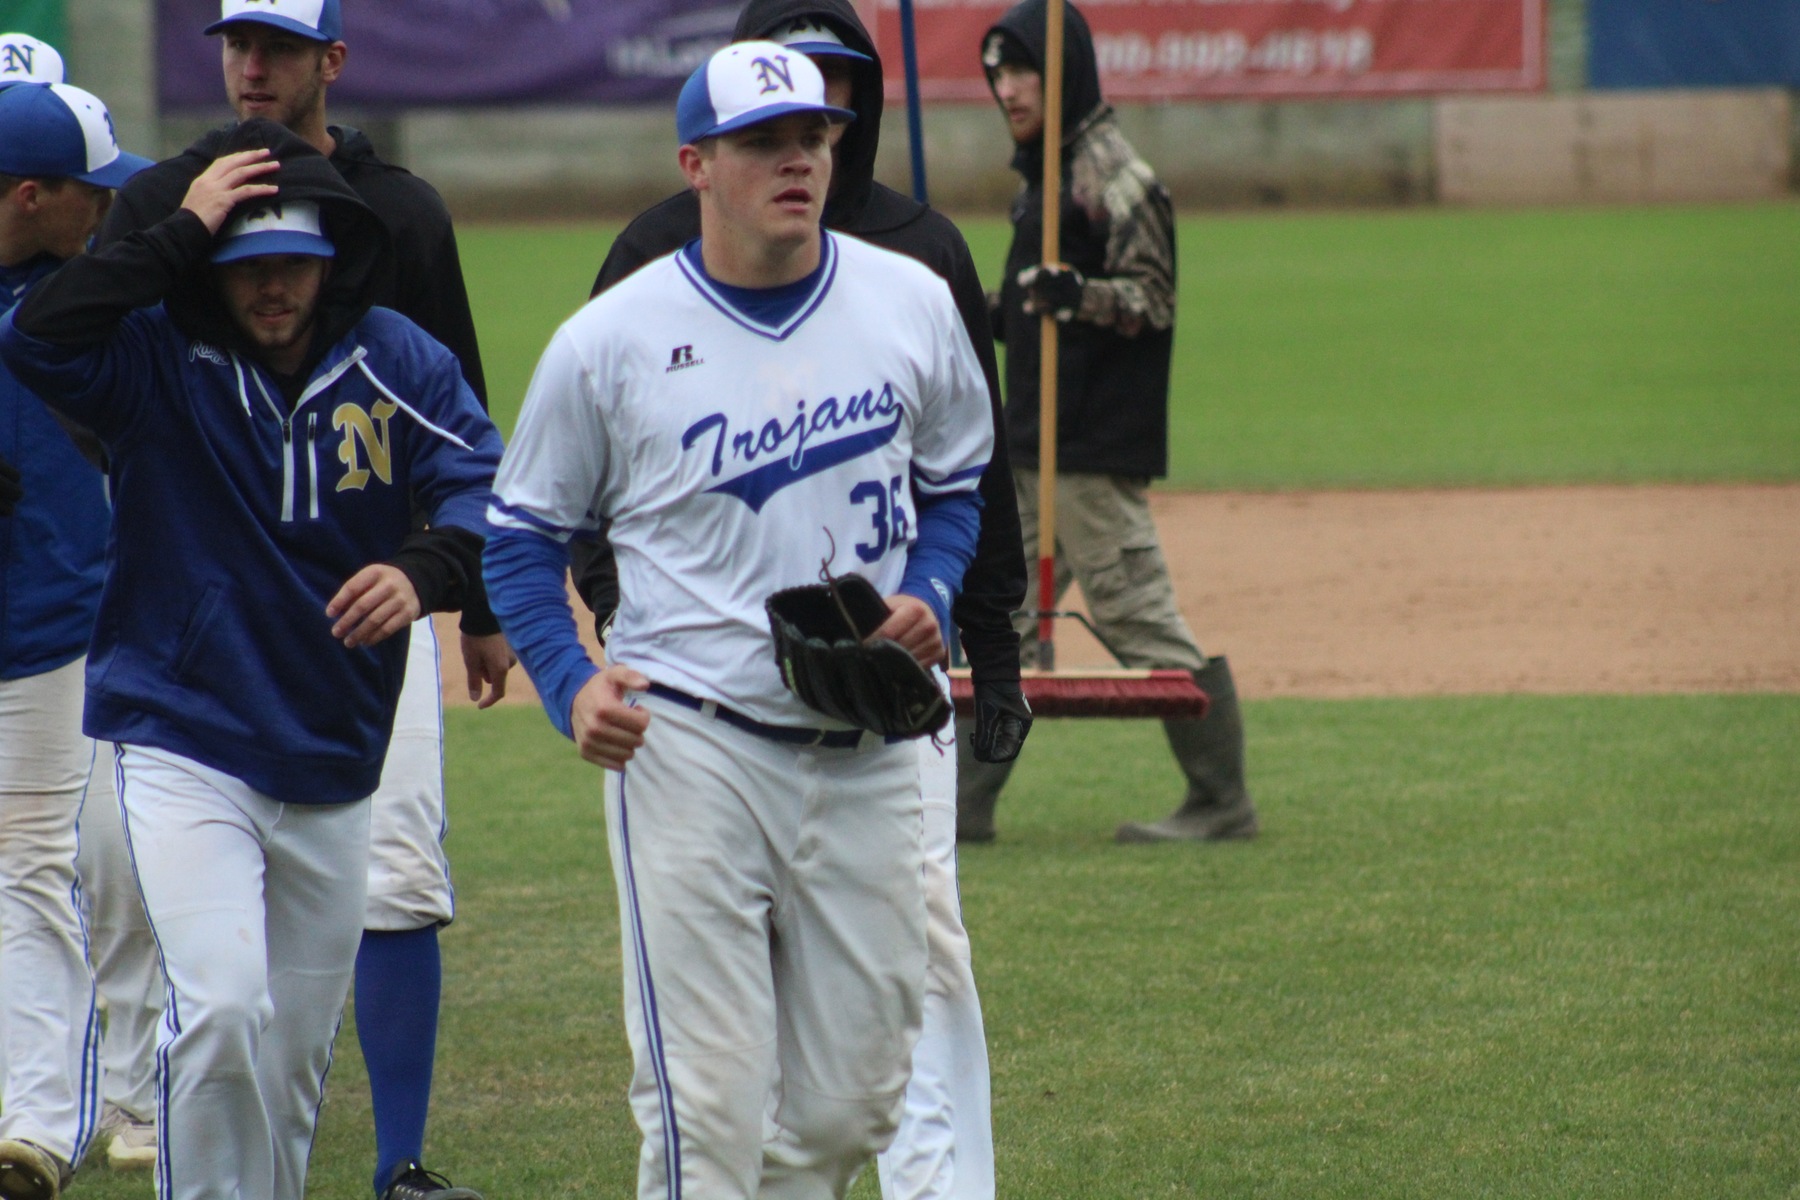 Tom Skoro comes off the field after NIACC's 7-6 win over Iowa Central Saturday at the regional tournament in Clinton.